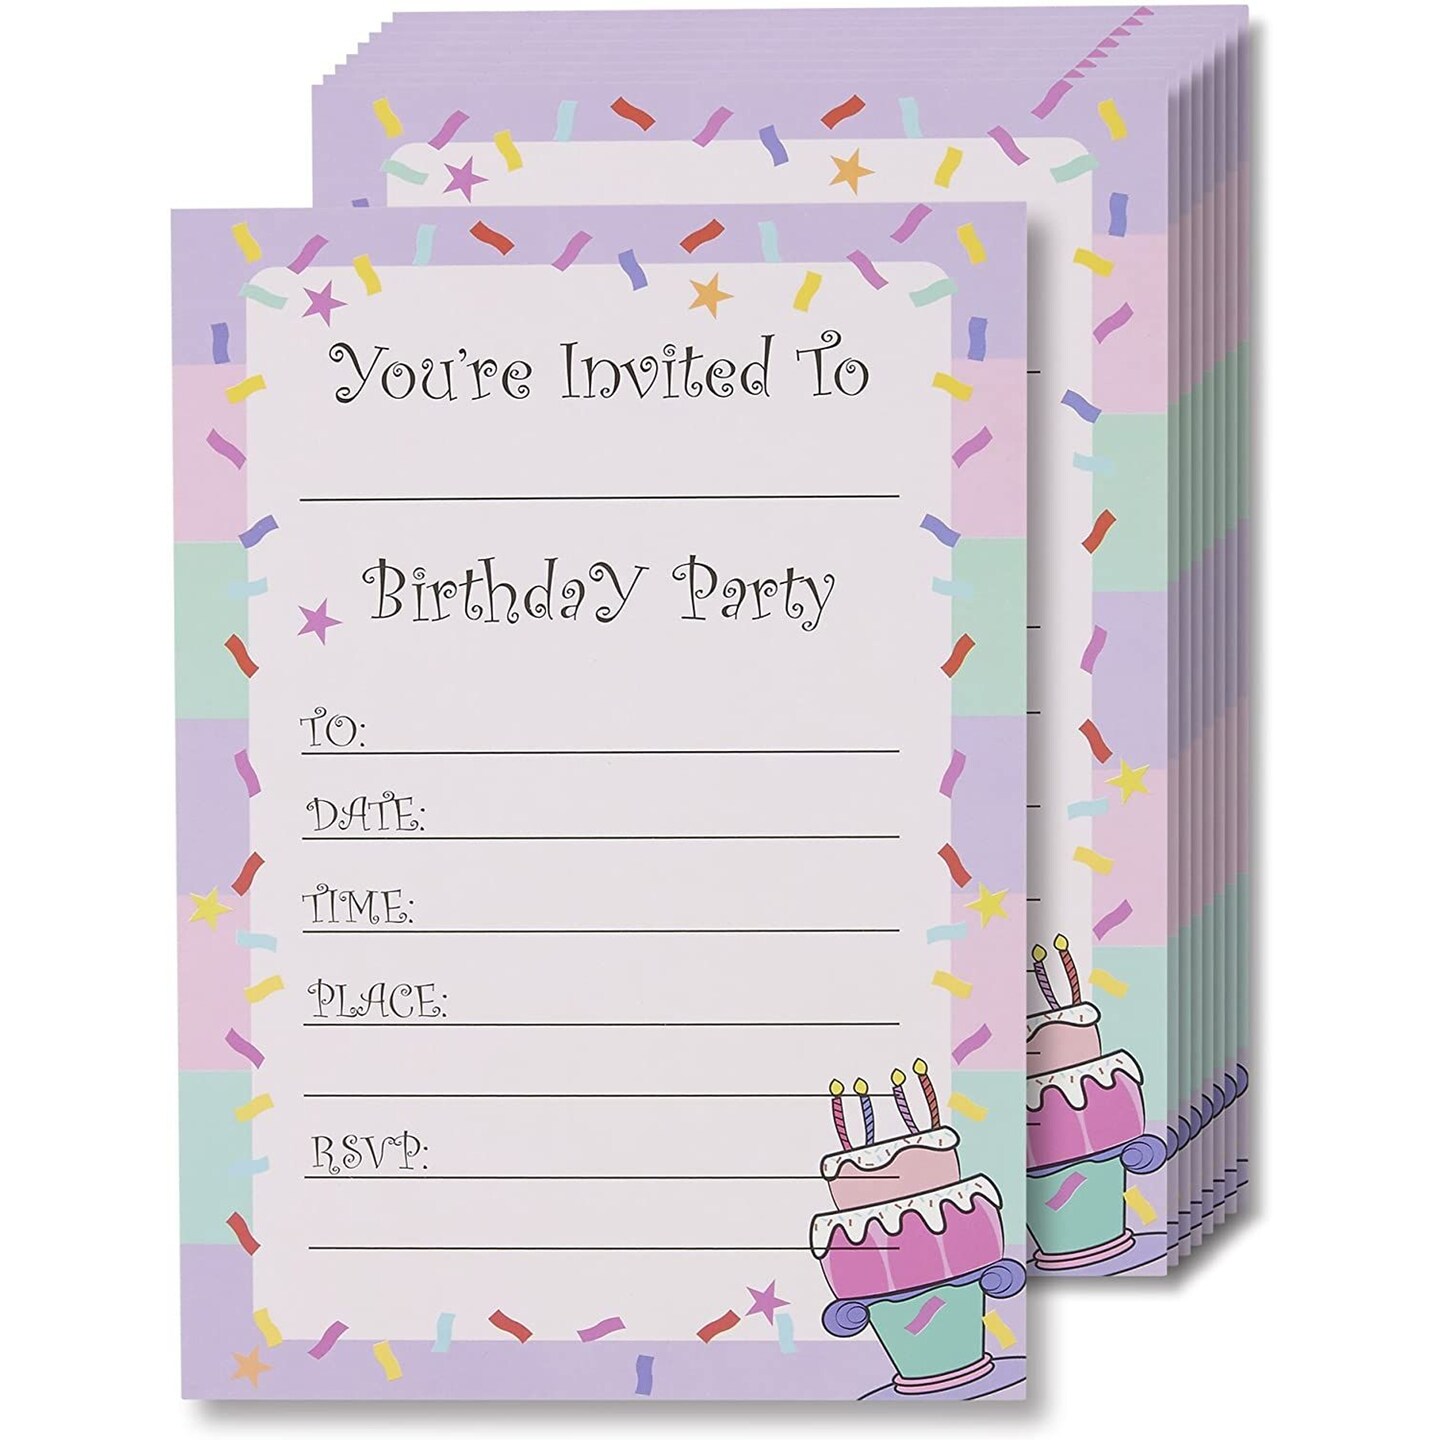 Invitation Cards &#x2013; 24-Pack Birthday Party Invitation Cards, Fill-in Invitations with Envelopes, Confetti Designs, 5 x 7 Inches